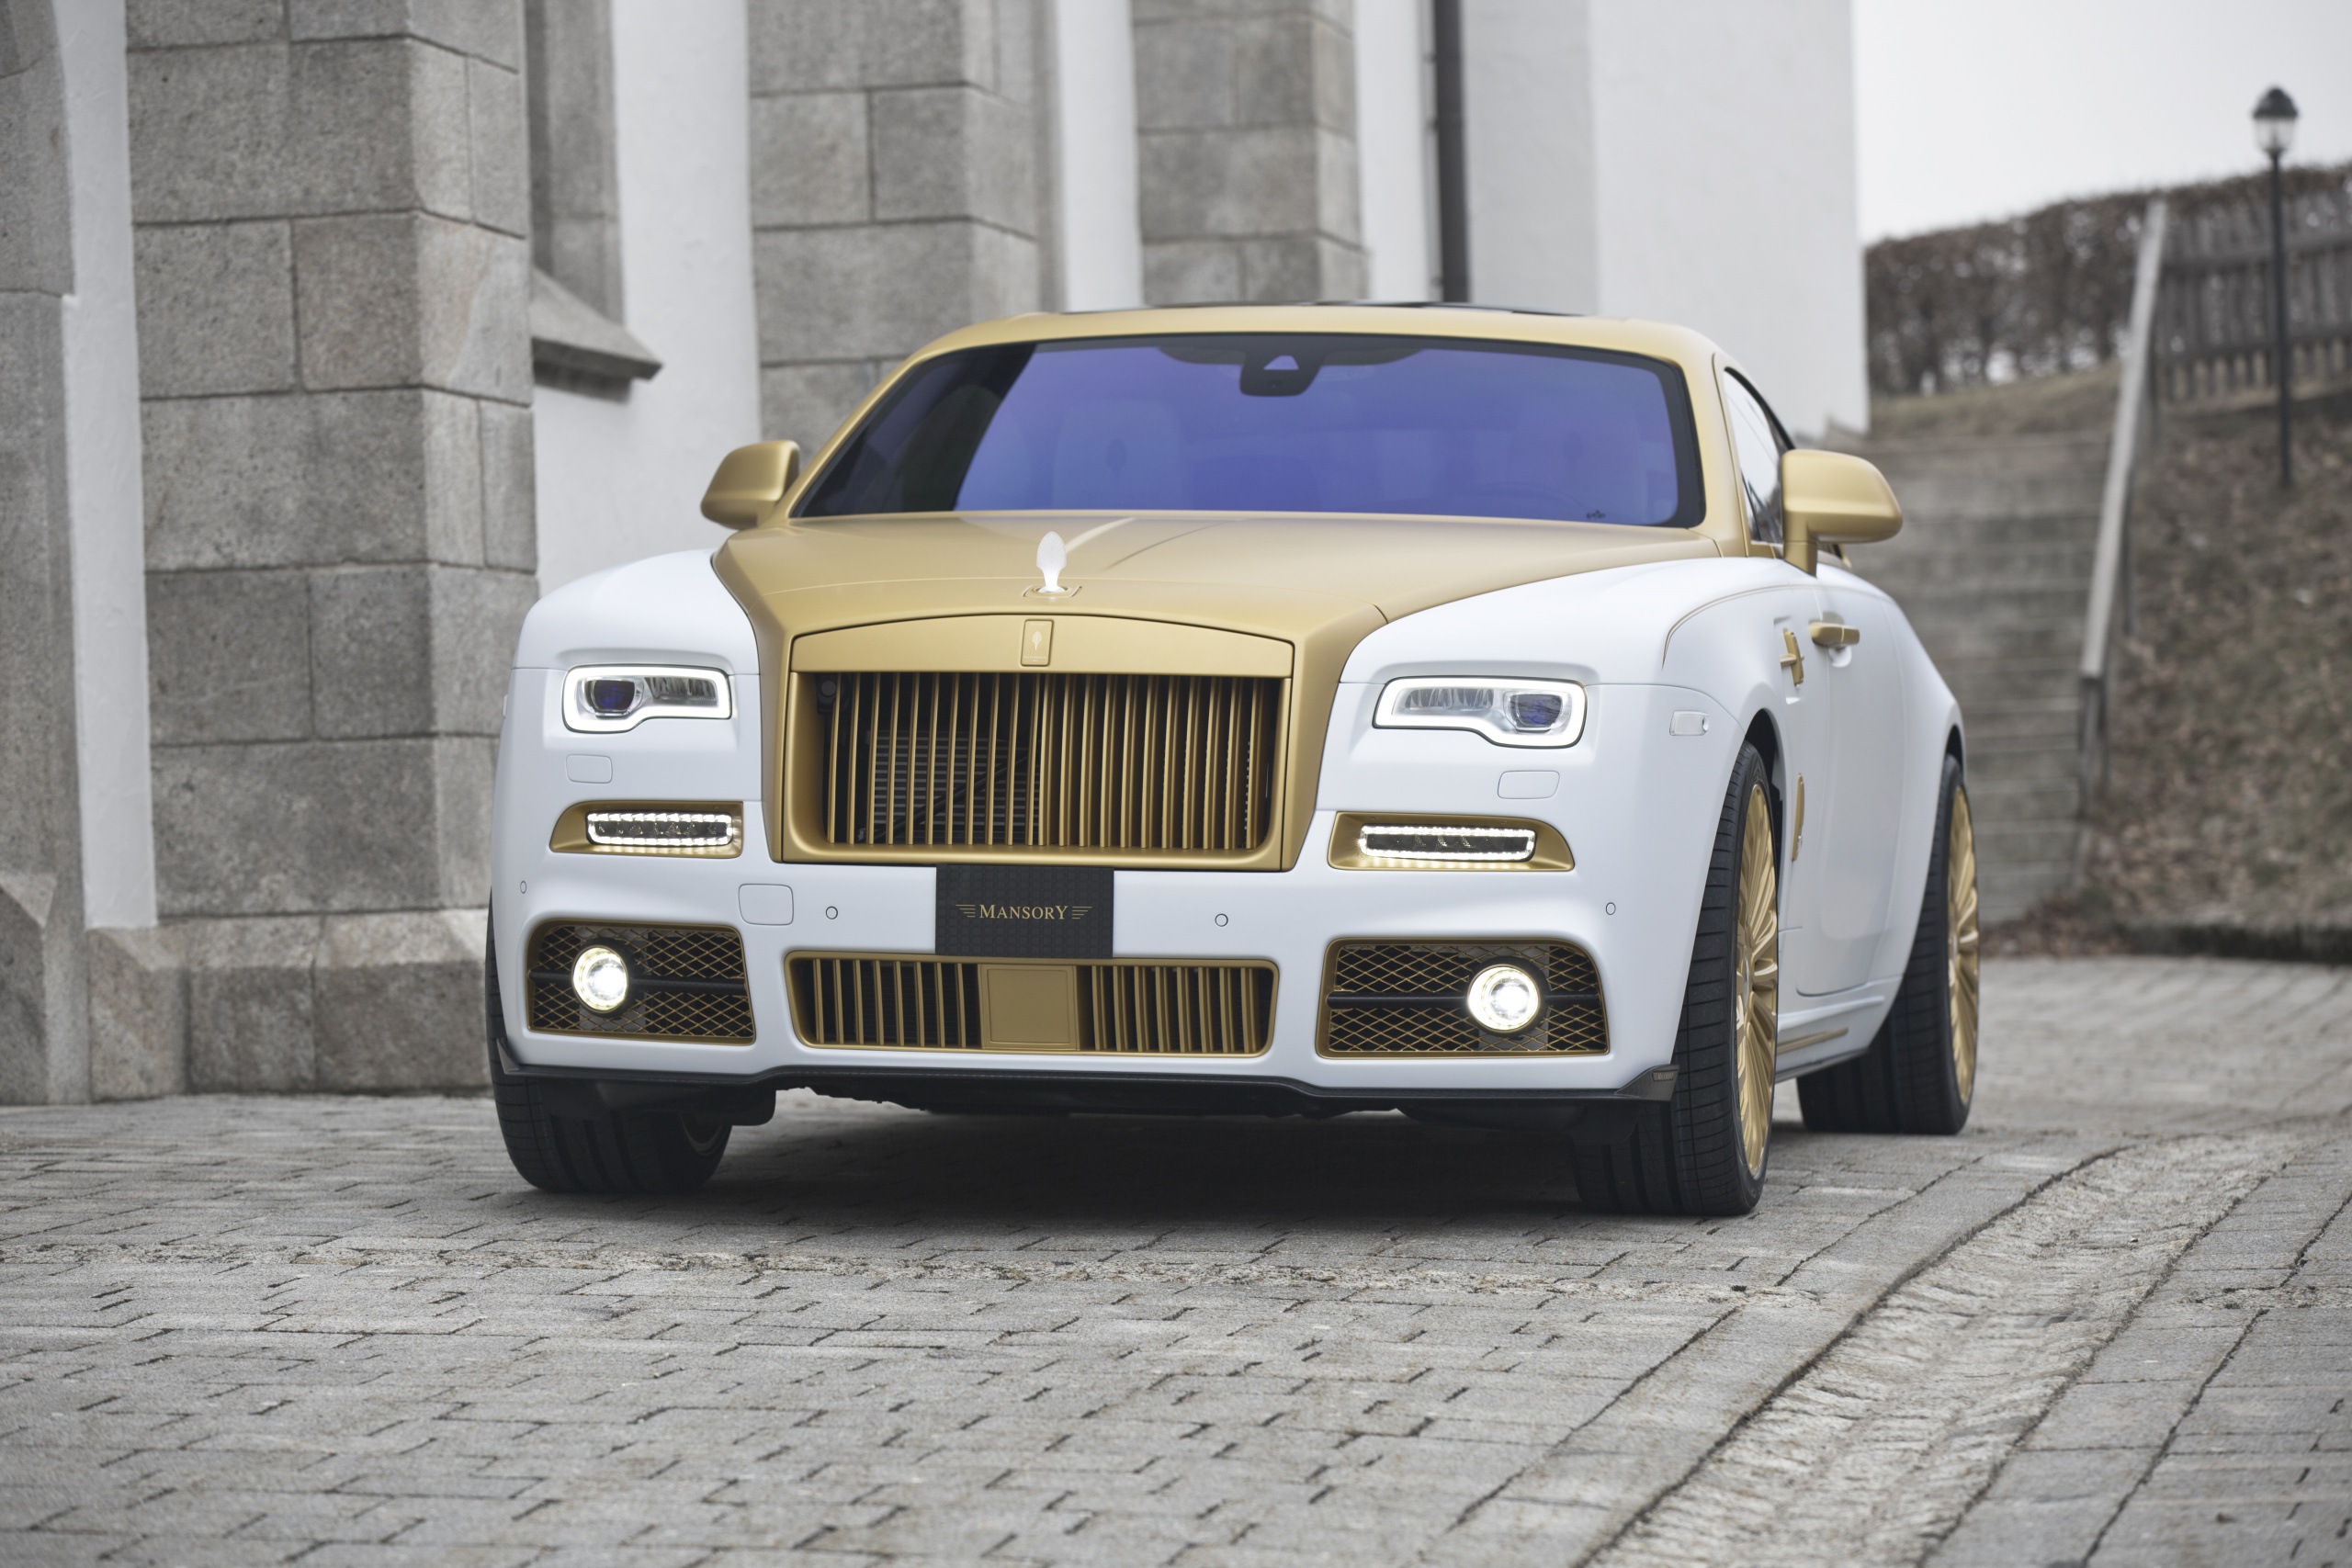 The RollsRoyce Ghost Is the Insanely Luxurious Affordable Rolls  YouTube